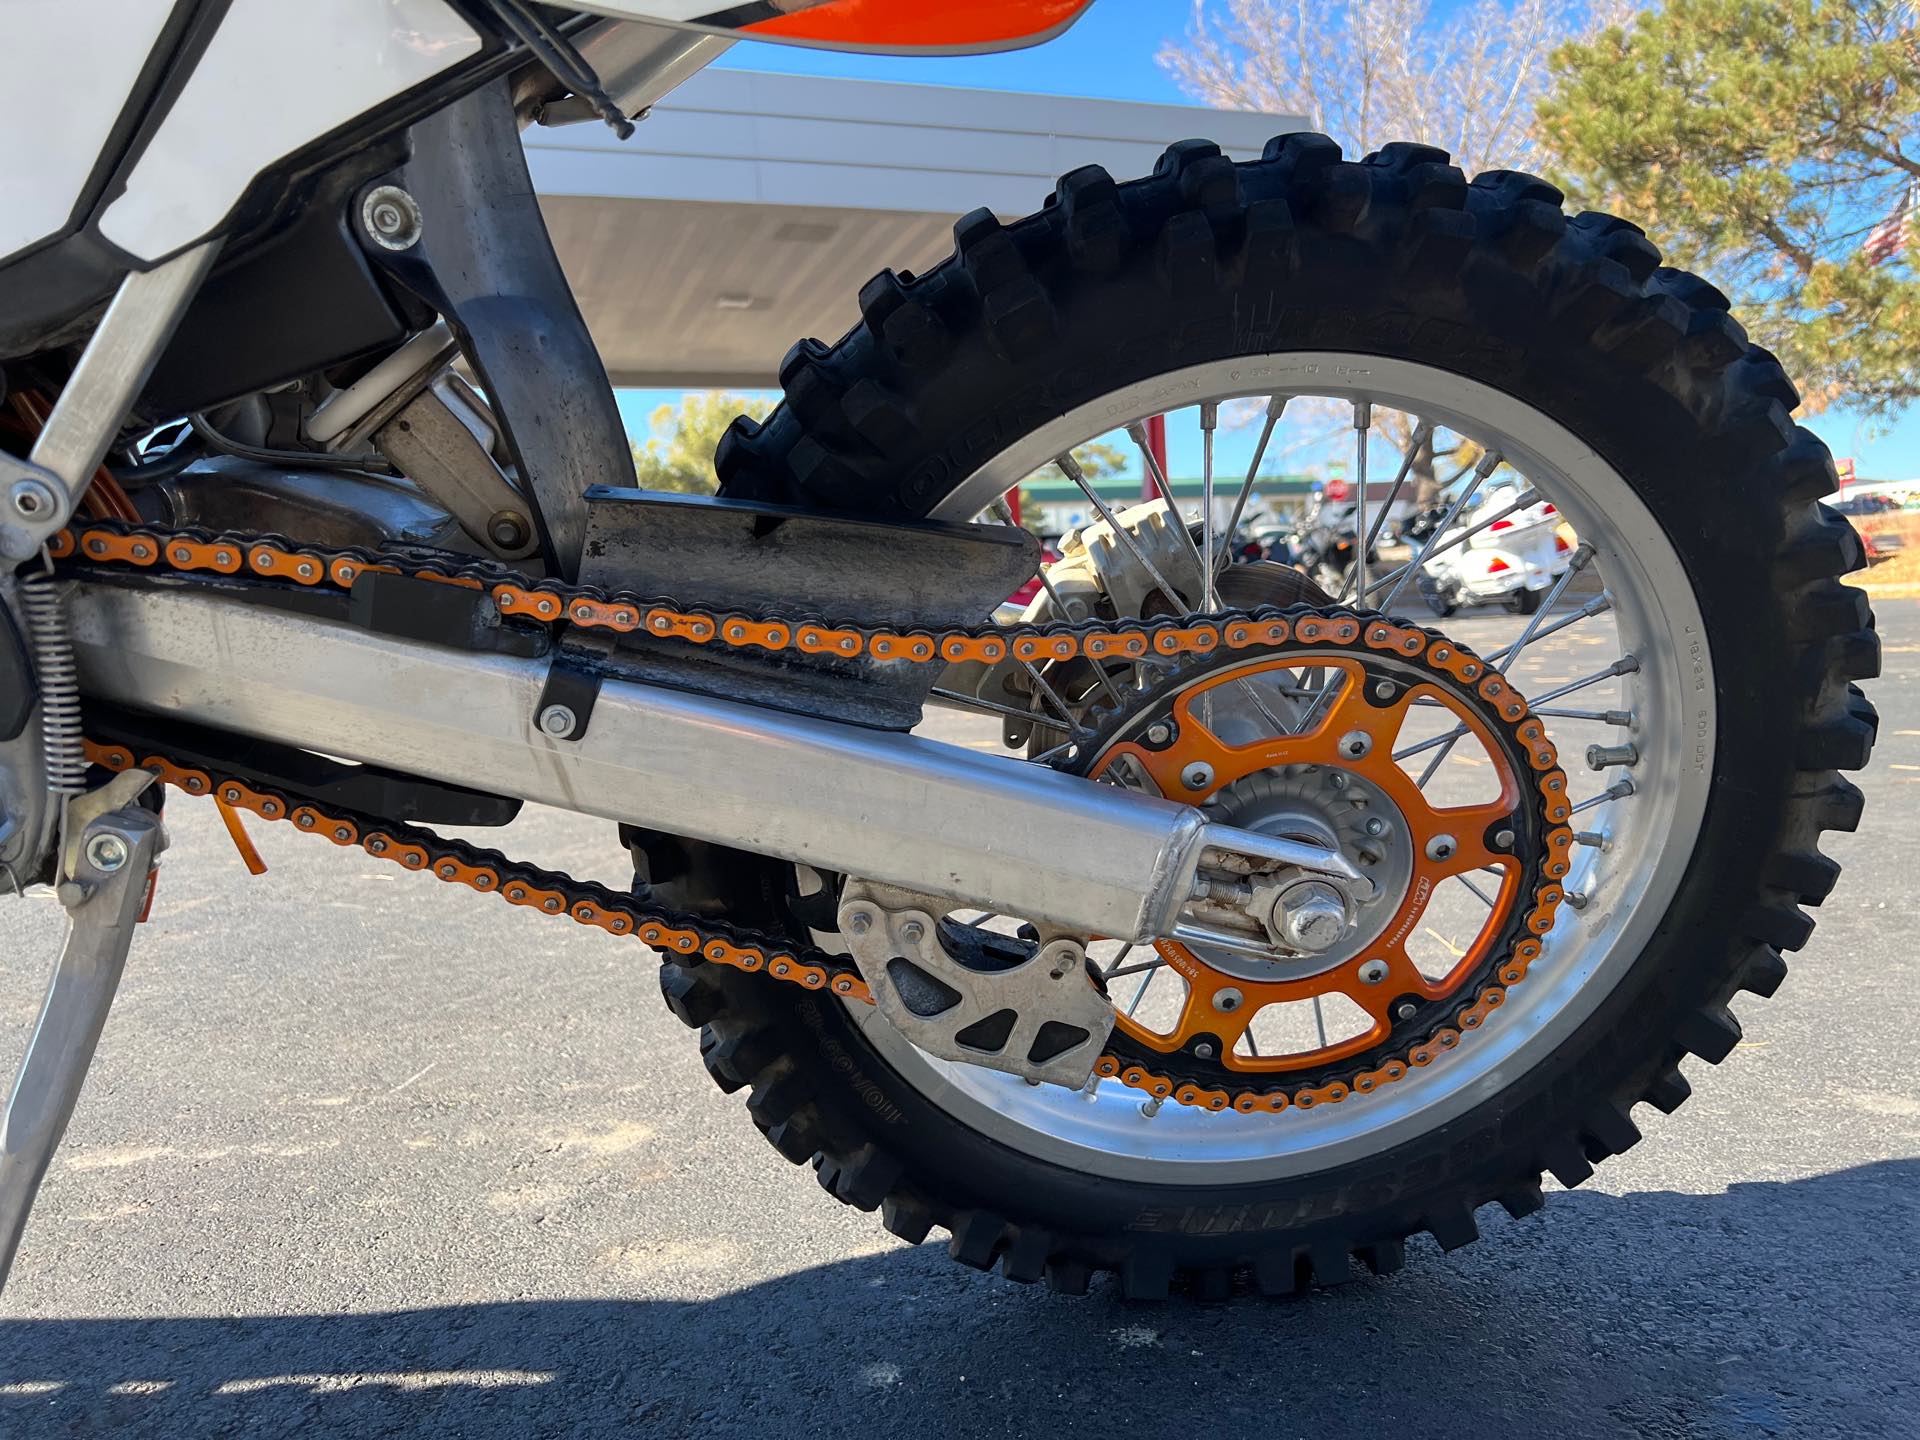 2001 KTM 380 at Aces Motorcycles - Fort Collins